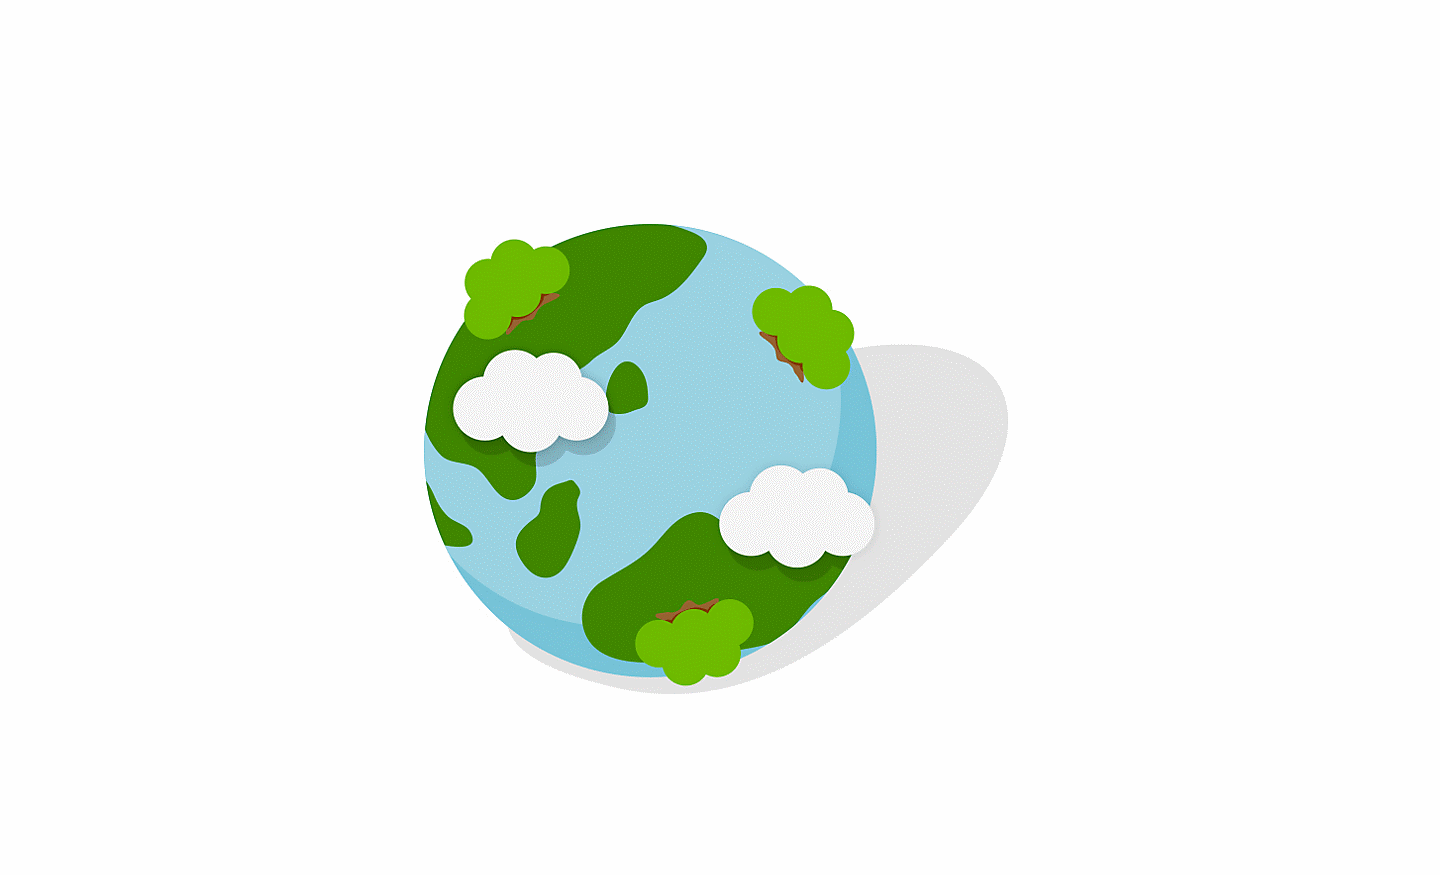 Simplified Illustration of the Earth